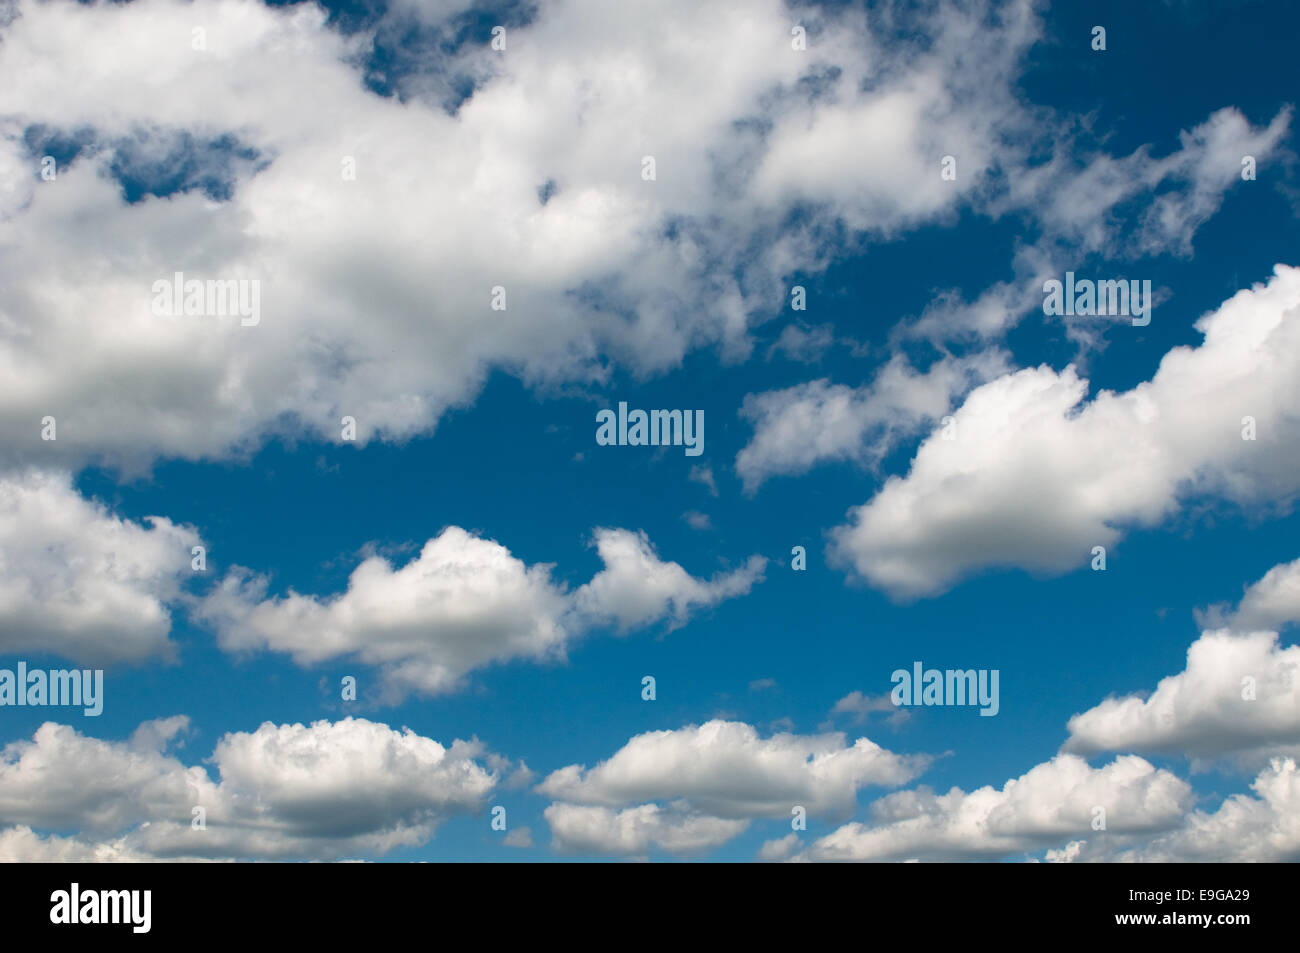 cloudy sky background Stock Photo